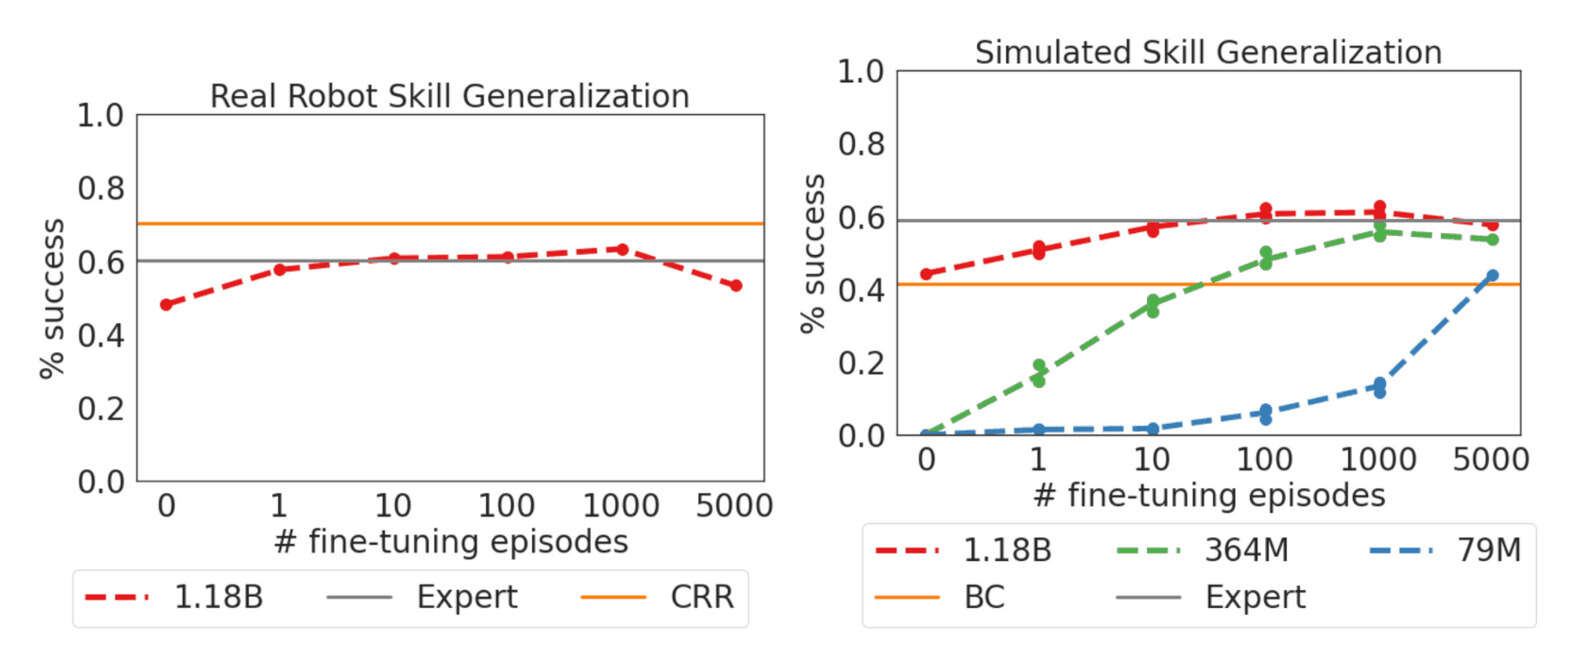 Figure 10: Robotics fine-tuning results. Left: Comparison of real robot Skill Generalization success rate averaged across test triplets for Gato, expert, and CRR trained on 35k expert episodes (upper bound). Right: Comparison of simulated robot Skill Generalization success rate averaged across test triplets for a series of ablations on the number of parameters, including scores for expert and a BC baseline trained on 5k episodes.